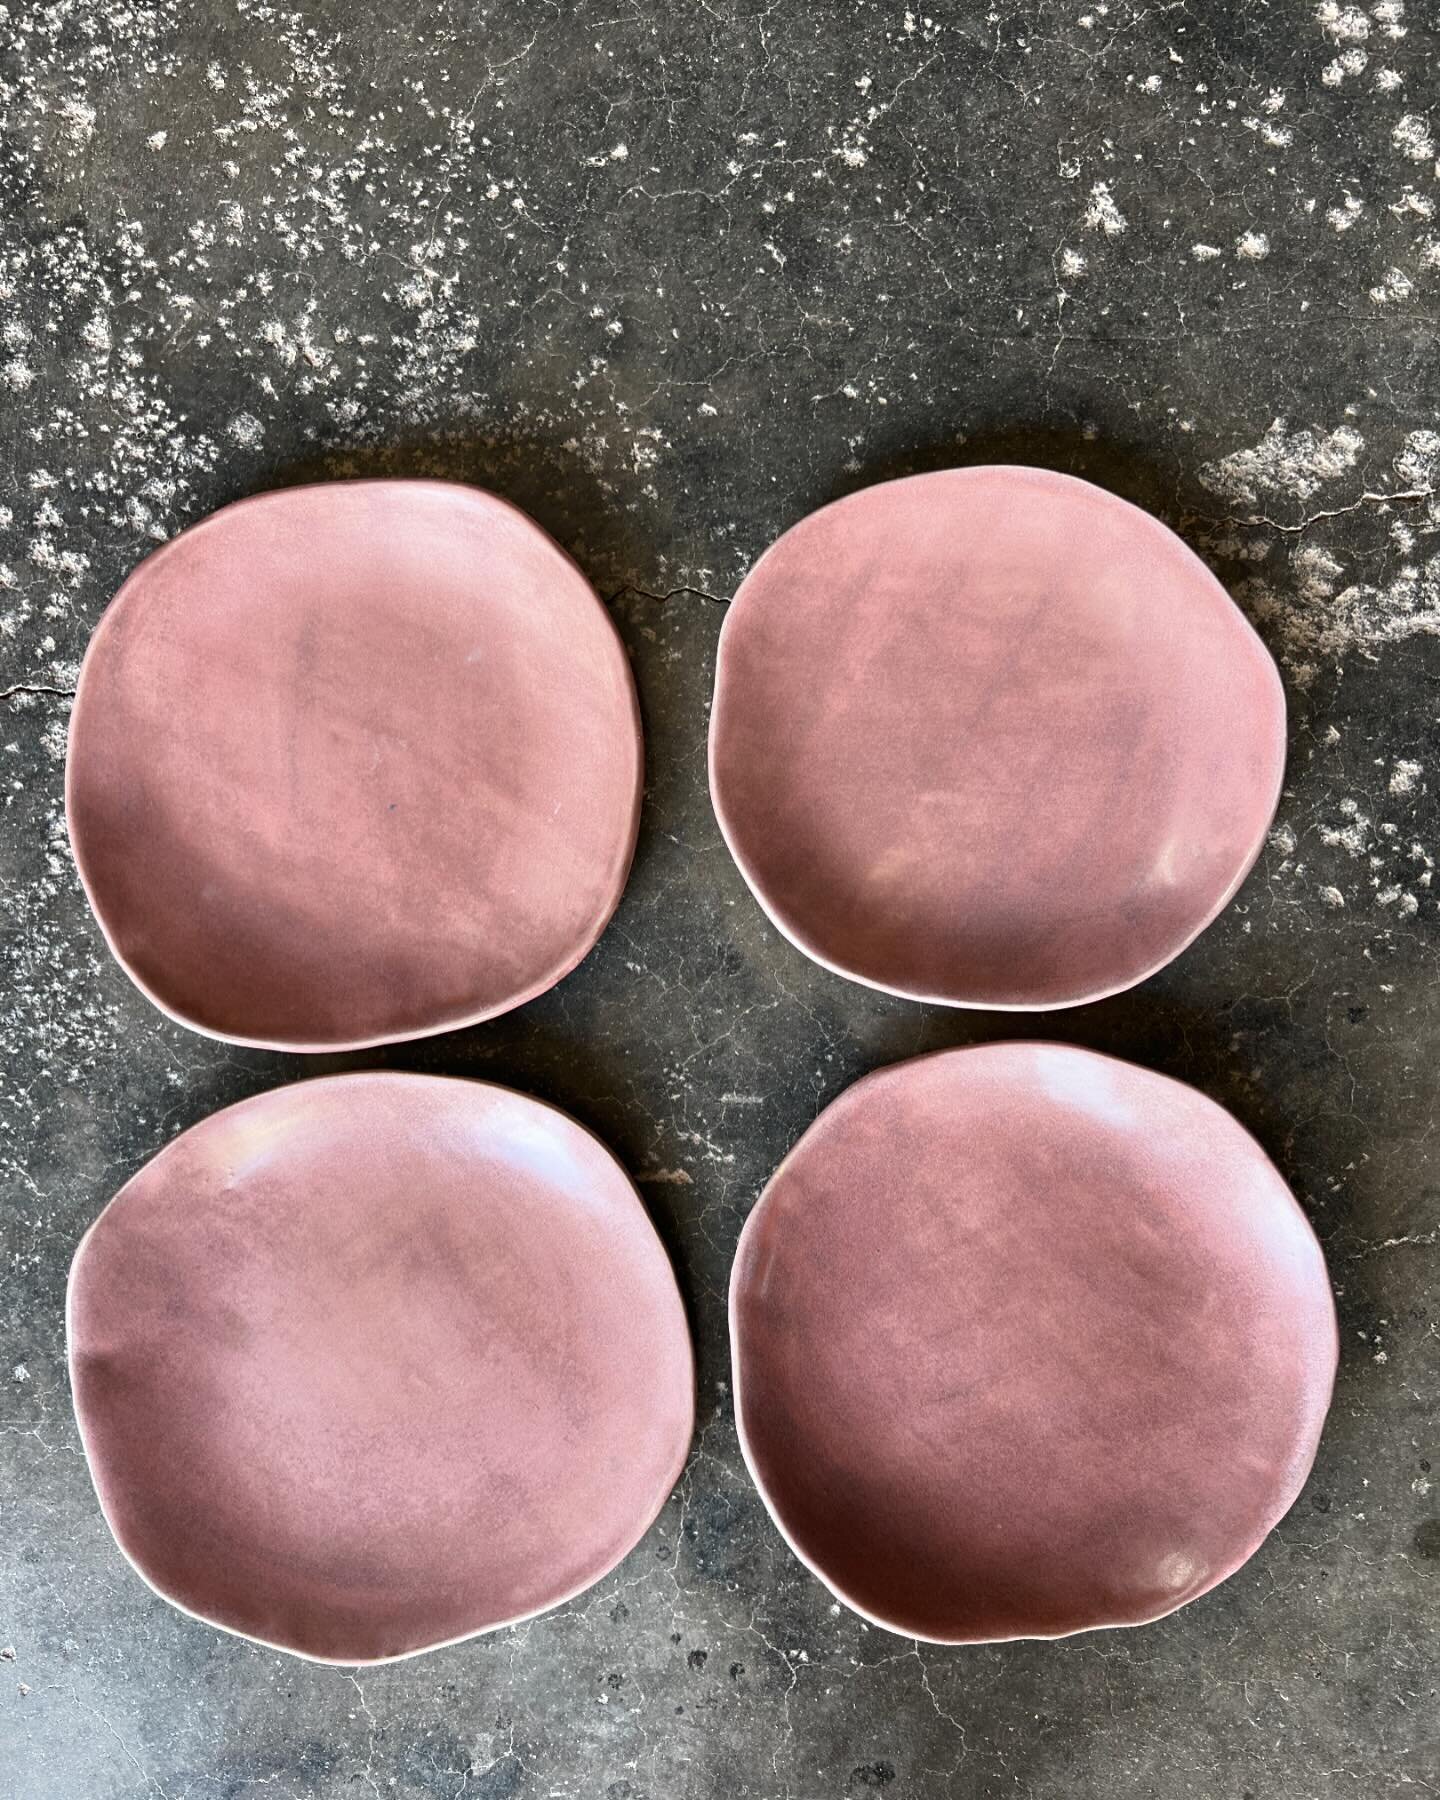 Pretty in pink!  Let me hear what you think! 👇🏼
.
.
.
.
.
This is a seasonal glaze to celebrate spring !! @monkeygirlartwork is taking her ser to Columbia, South Carolina !  She is an amazing artist!  Please follow her Instagram! Thank you amiga 🫶